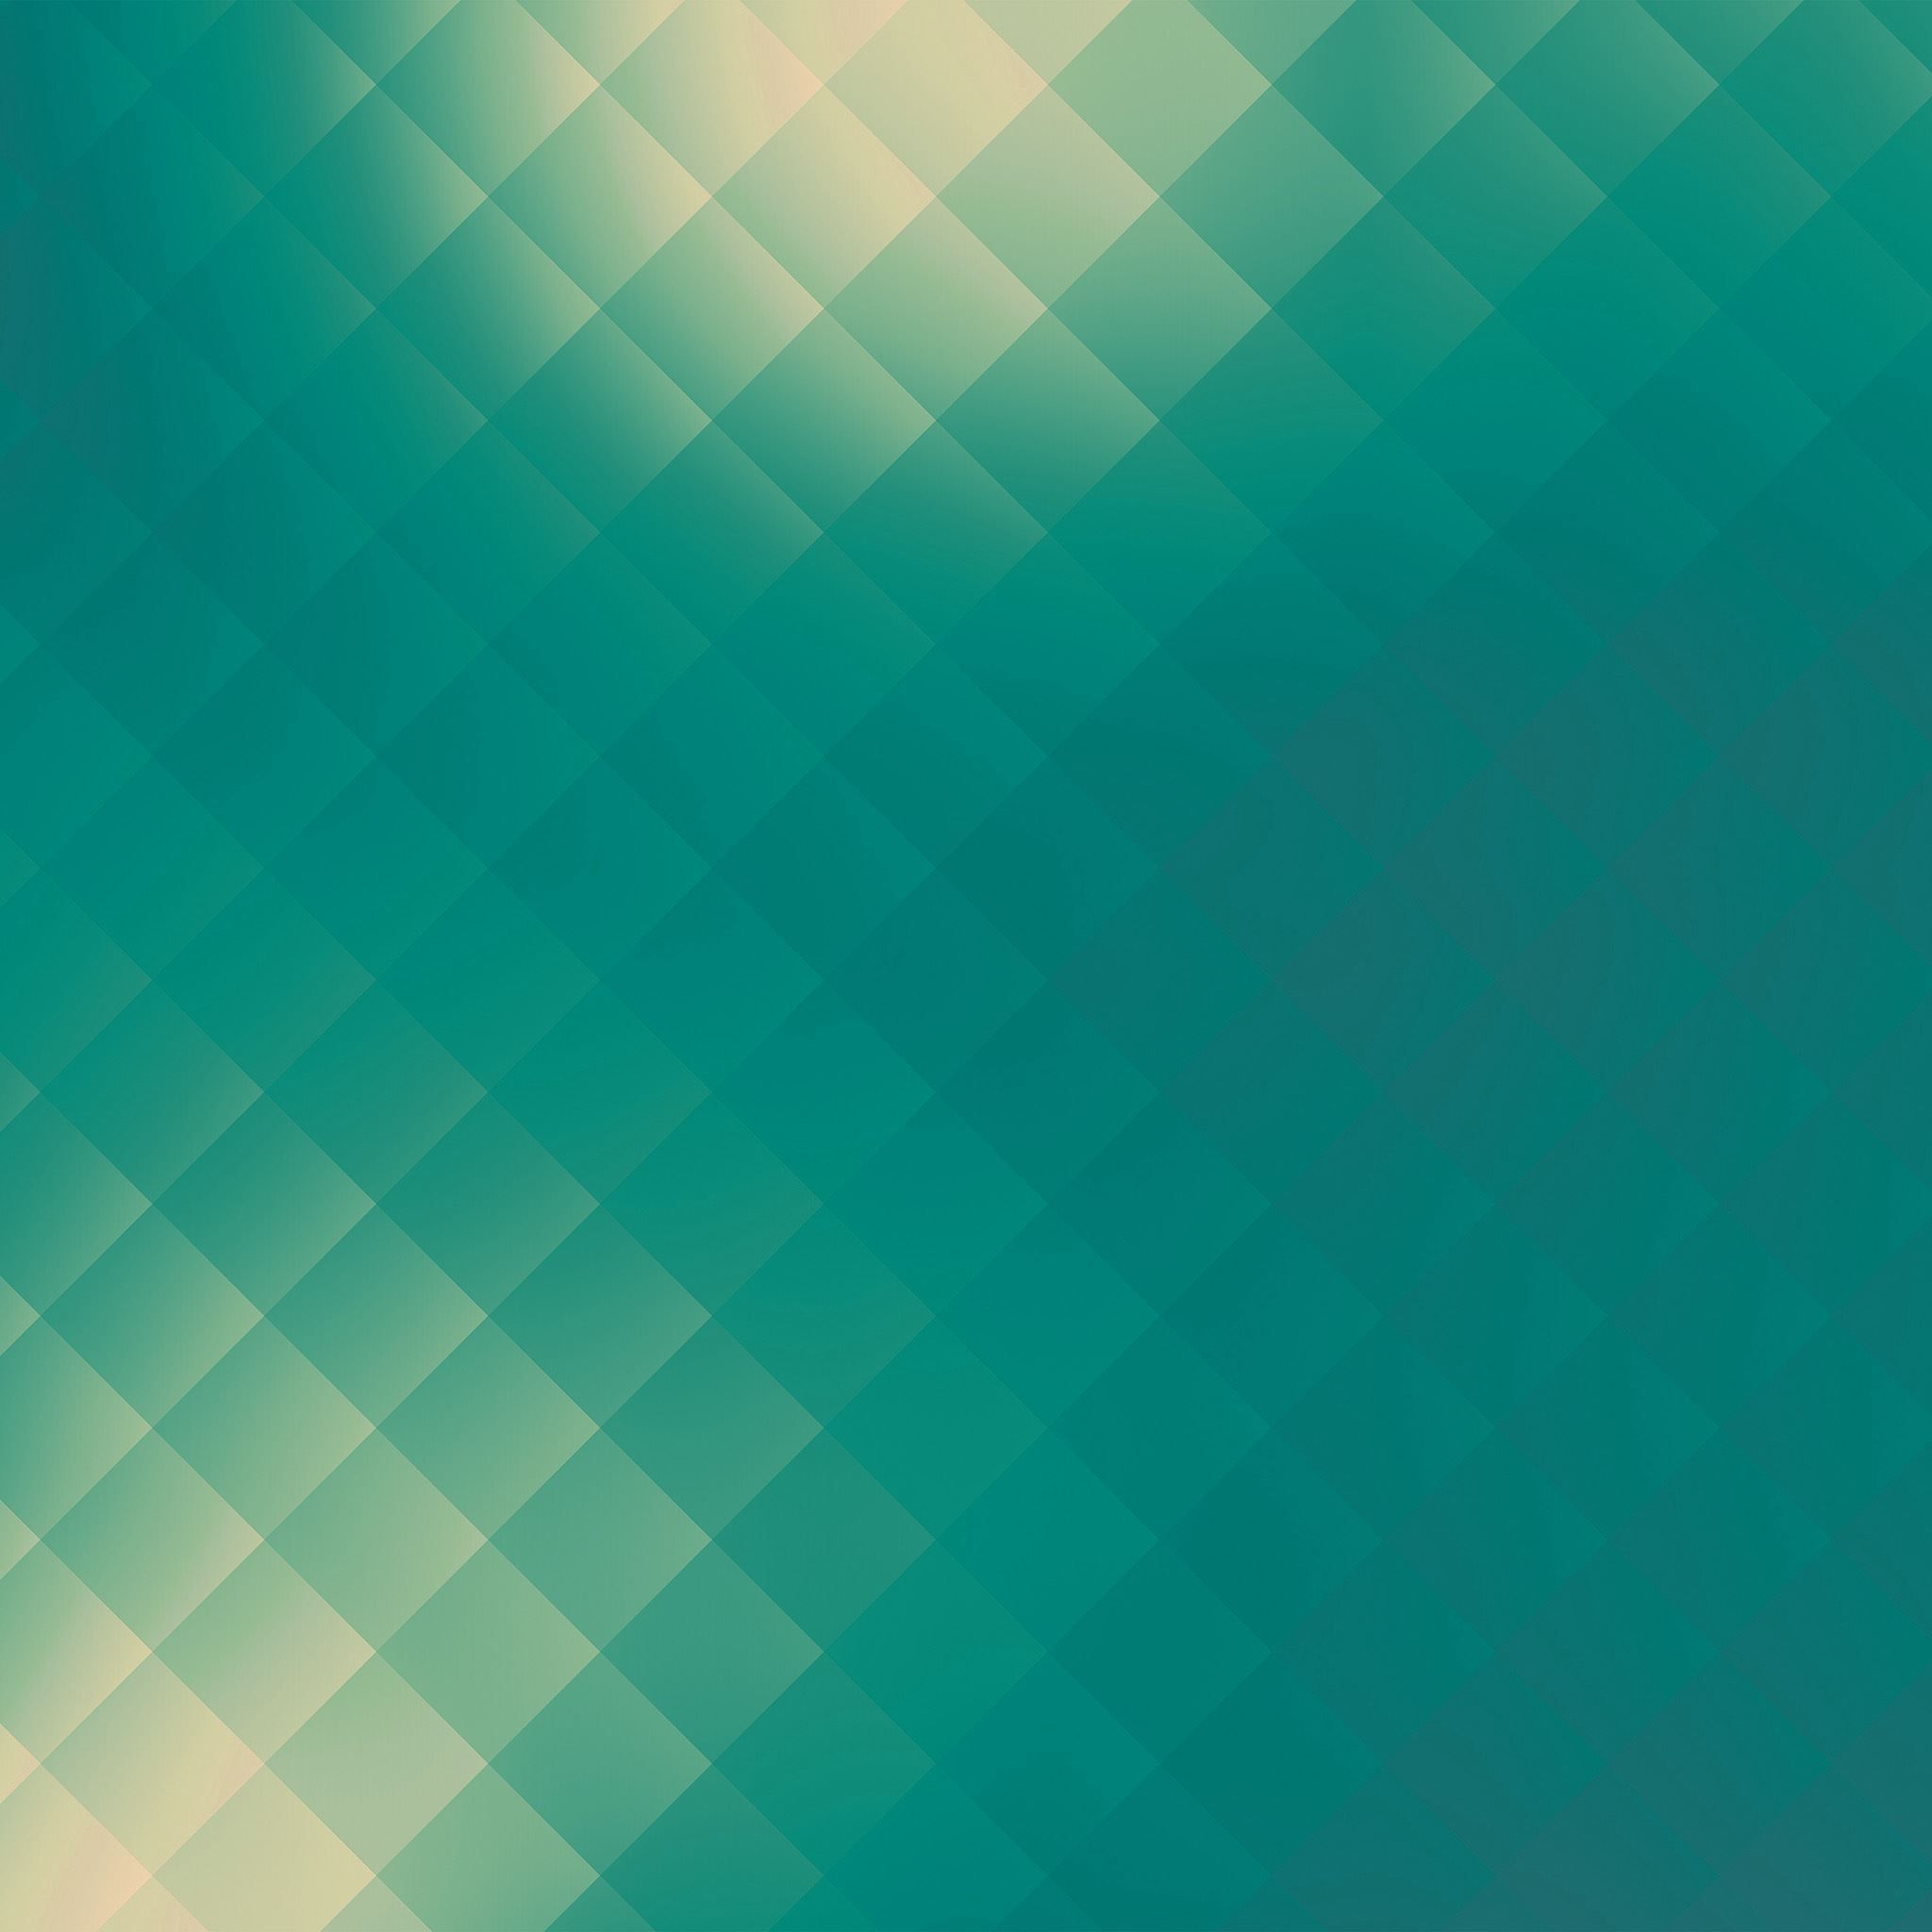 Square Party Green Soft Abstract Pattern iPad Air Wallpaper Free Download